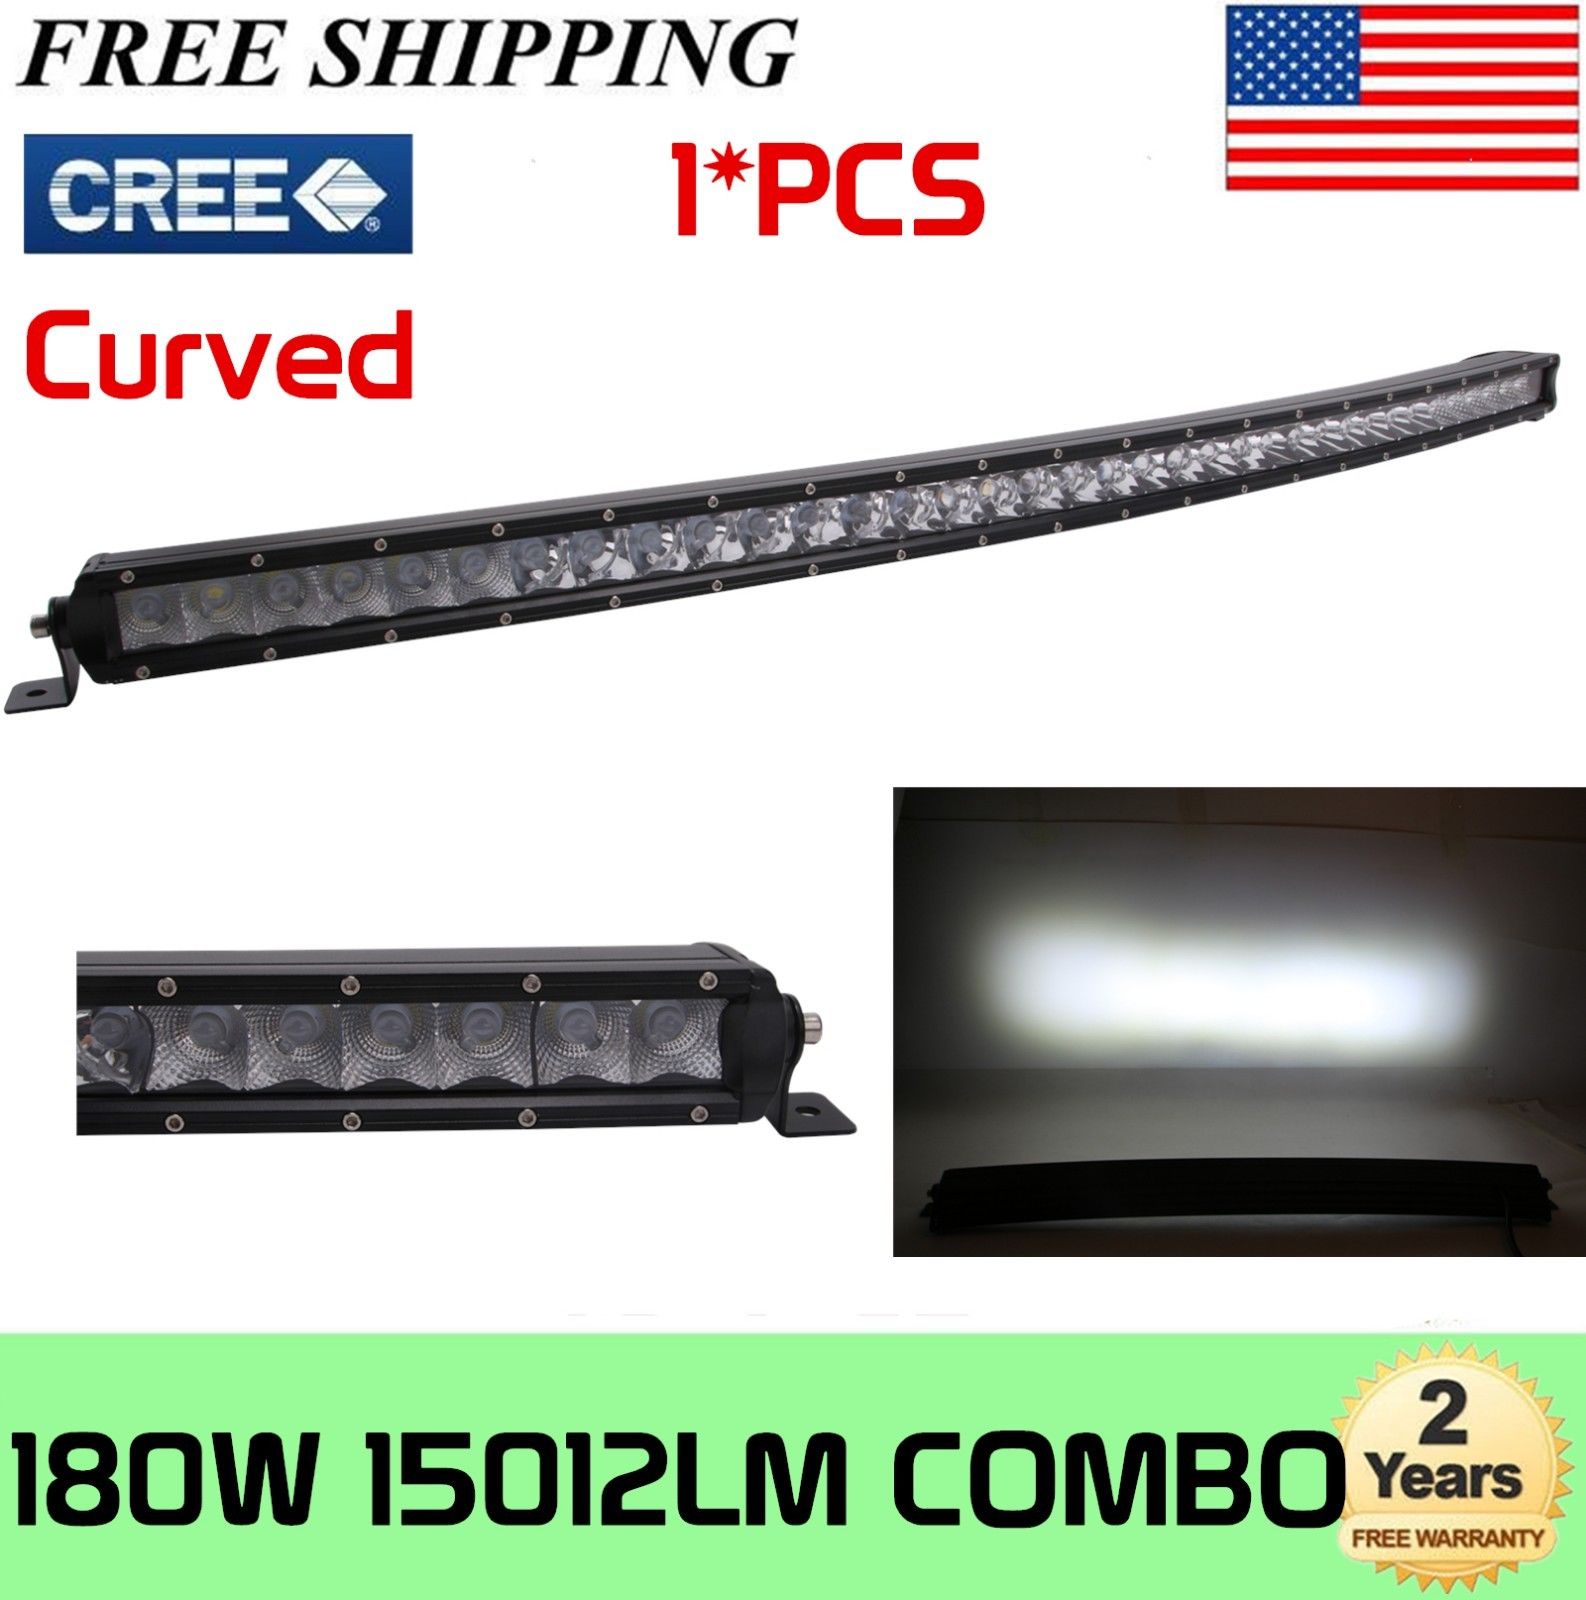 37inch Curved LED Light Bar 180W Offroad CREE Slim Single Row Combo RZR 38/40 